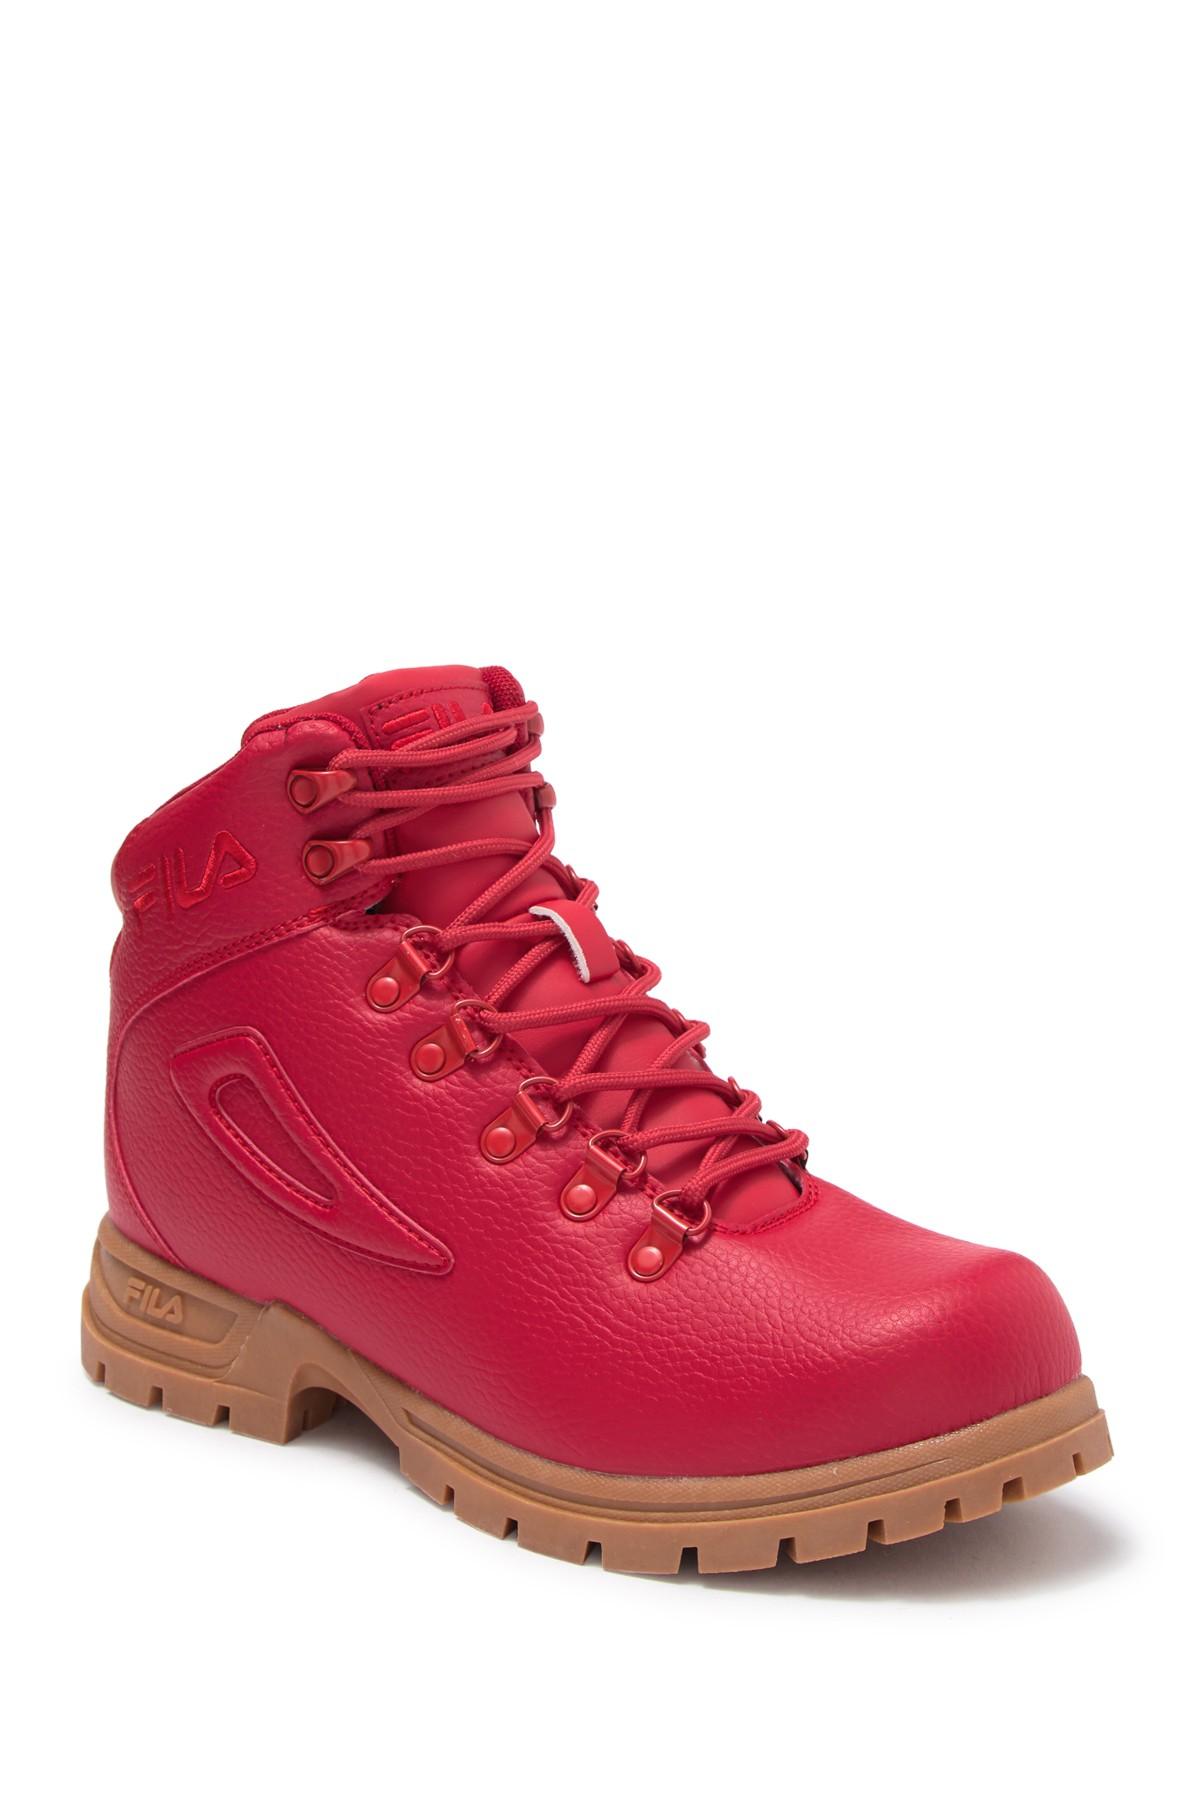 Fila Synthetic Diviner Hiking Boot in Red for Men - Lyst